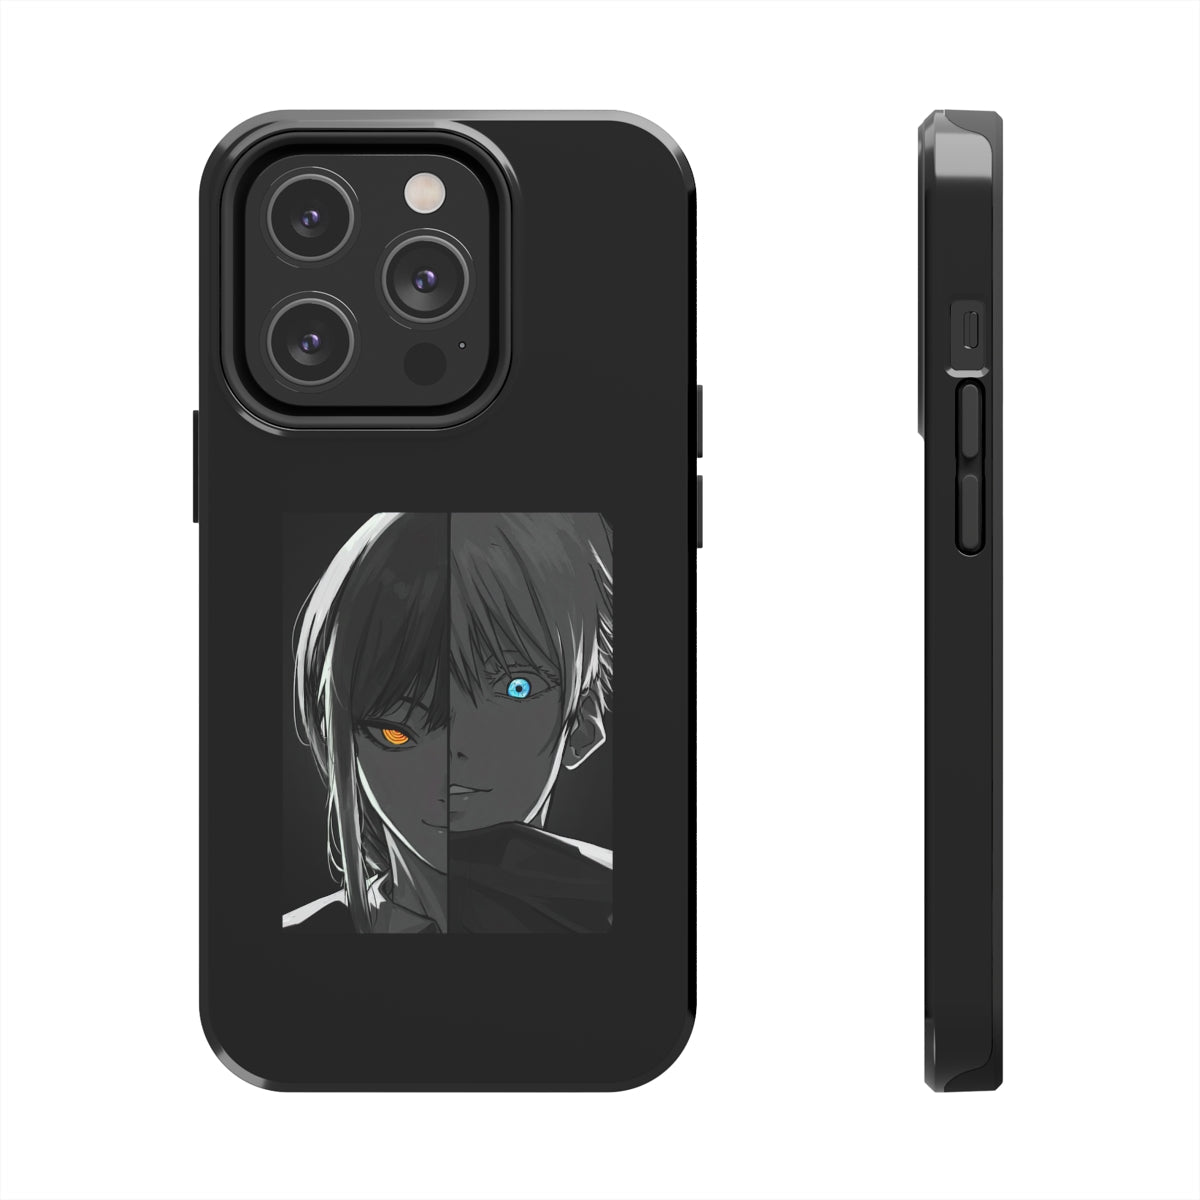 Gojo and Makima Chainsaw Man/Jujutsu Kaisen Anime iPhone Case (Series 12, 13, 14) - One Punch Fits